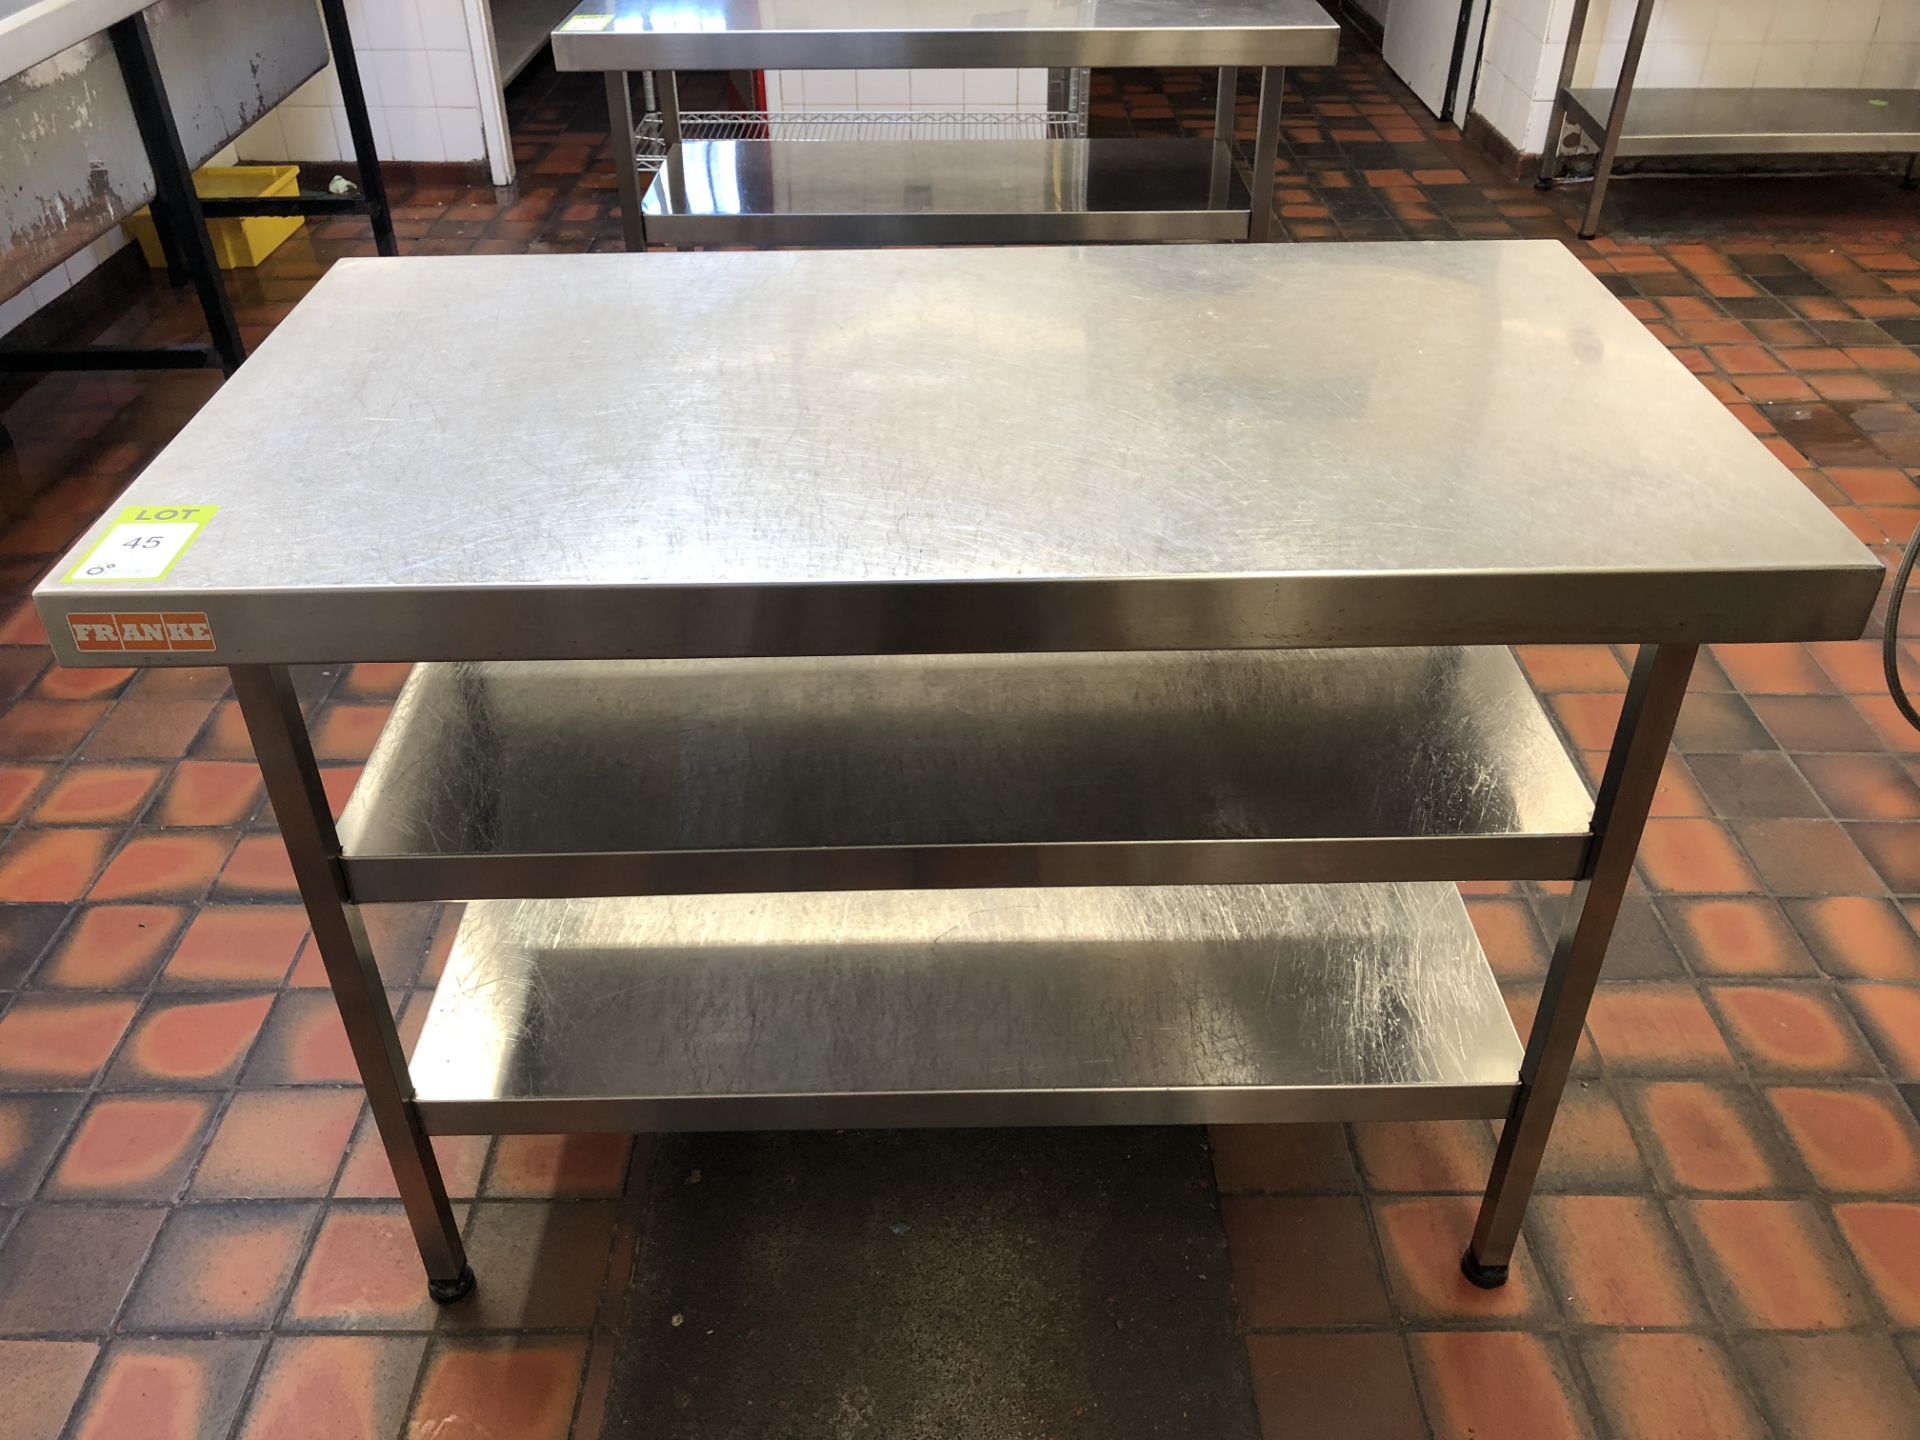 Stainless steel Preparation Table, 1200mm x 650mm, with 2 shelves under (located in Kitchen)